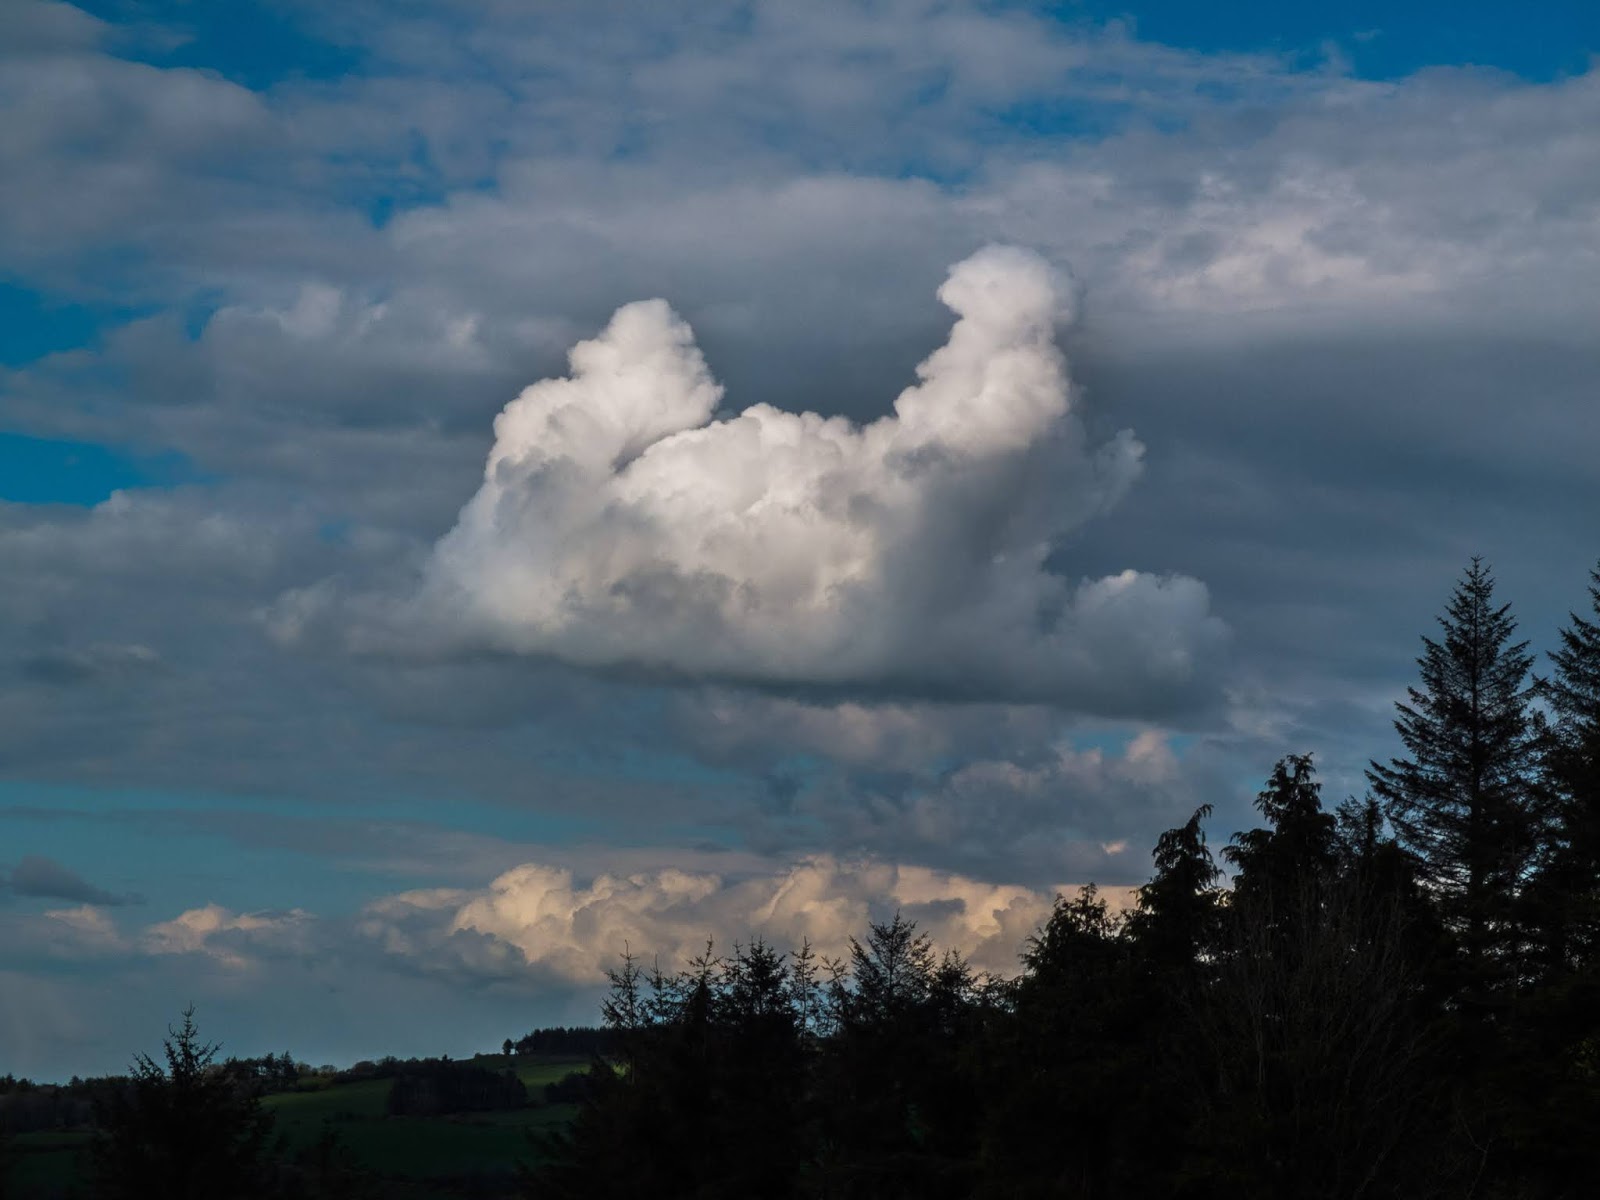 Clouds over conifer trees in the mountains in North Cork.